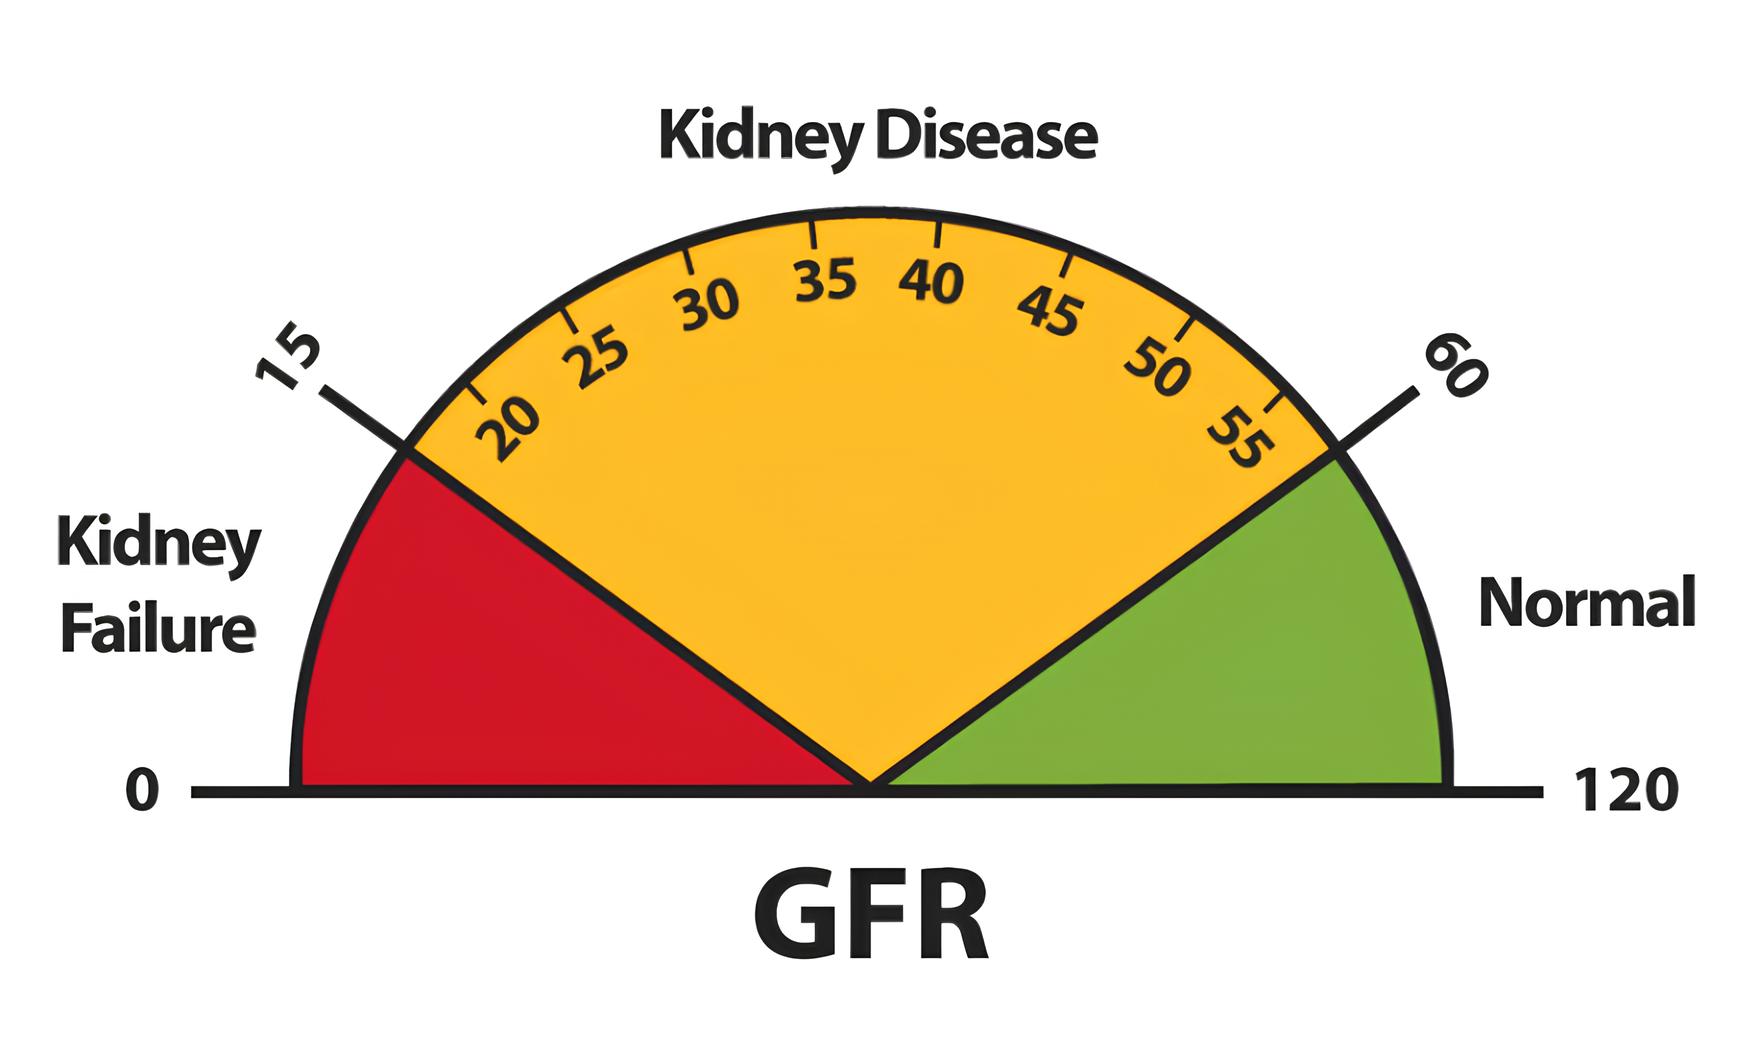 What is GFR